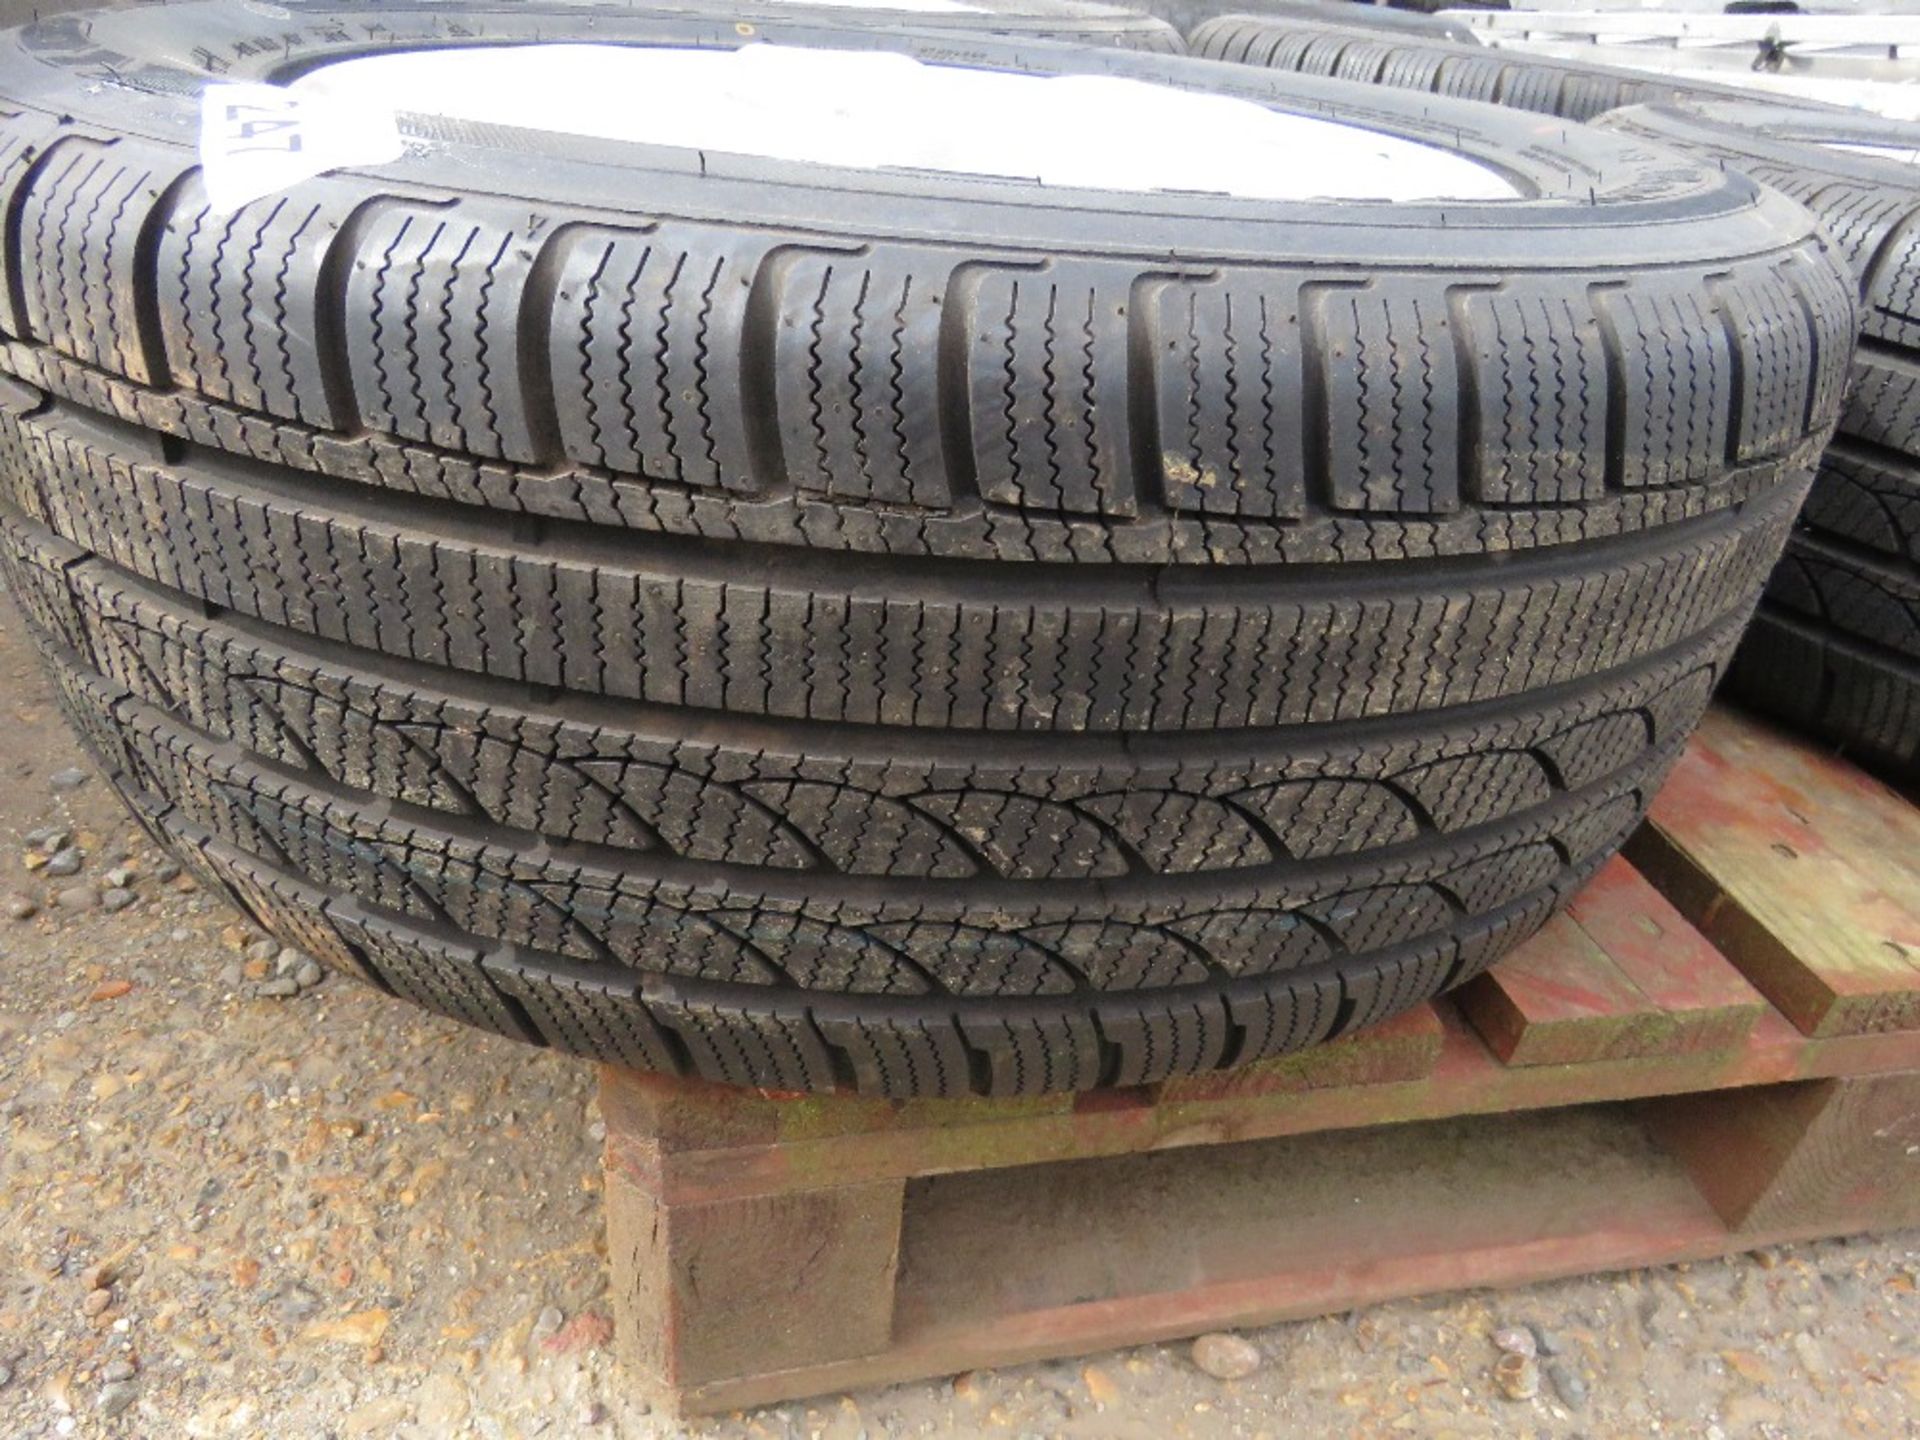 SET OF VW 235/55R17 SNOW TYRES ON ALLOY RIMS. - Image 2 of 5